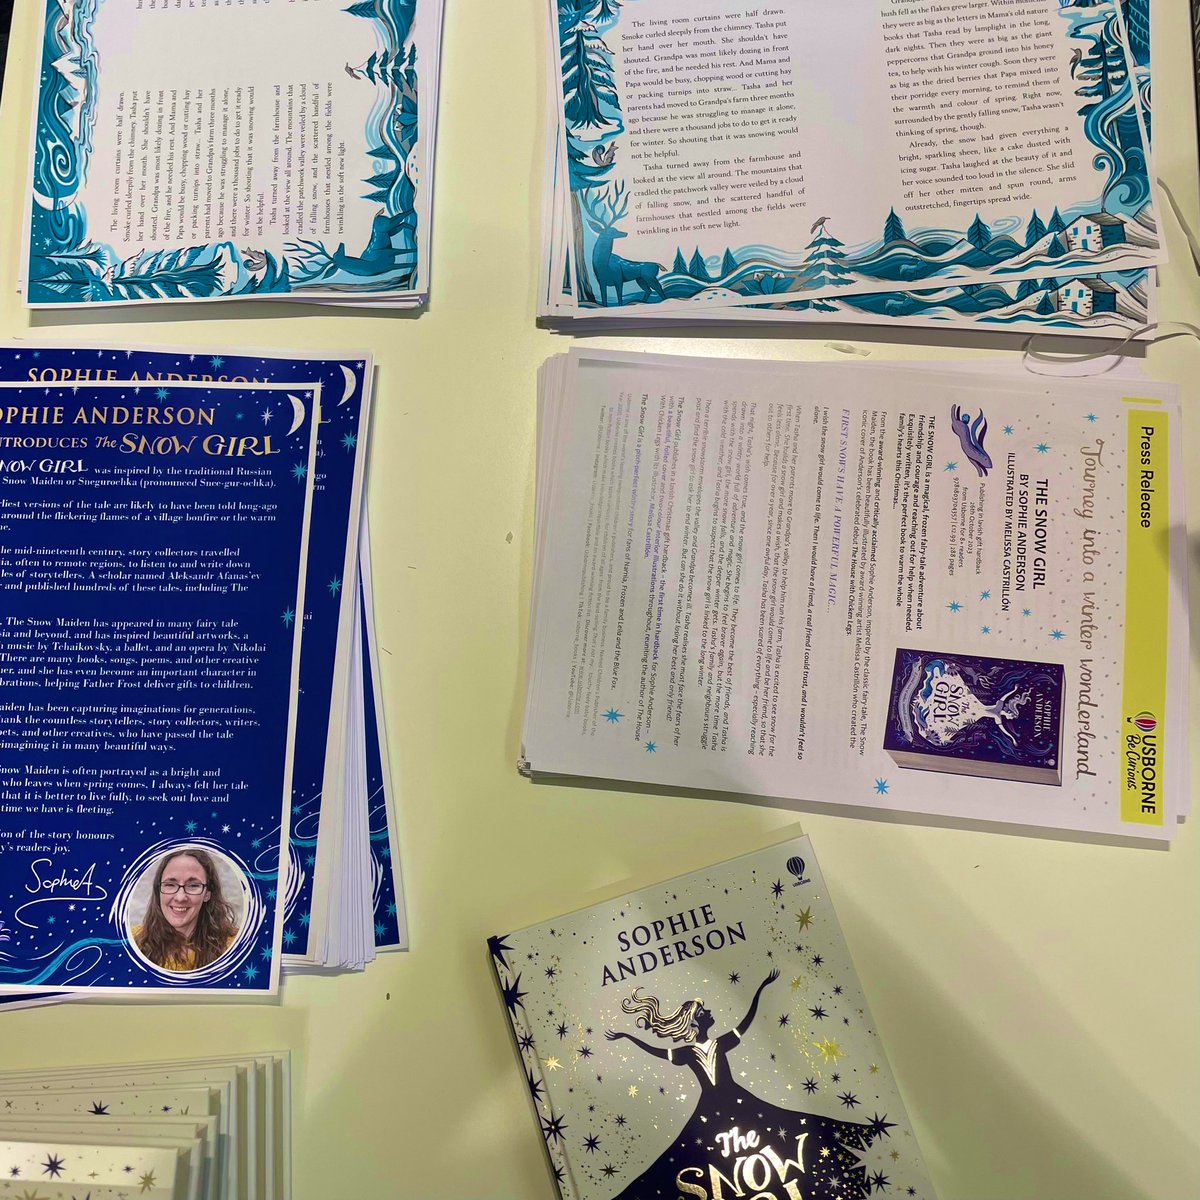 She was made of wishes, starlight, snowfall and magic… ❄️ 

Excited to share these HARDBACK PROOF packages with early readers 🤩 

Featuring signed bookplates, hot chocolate for you and a friend, @sophieinspace letter, and a sneak peek at @mv_castrillon’s artwork!

#TheSnowGirl